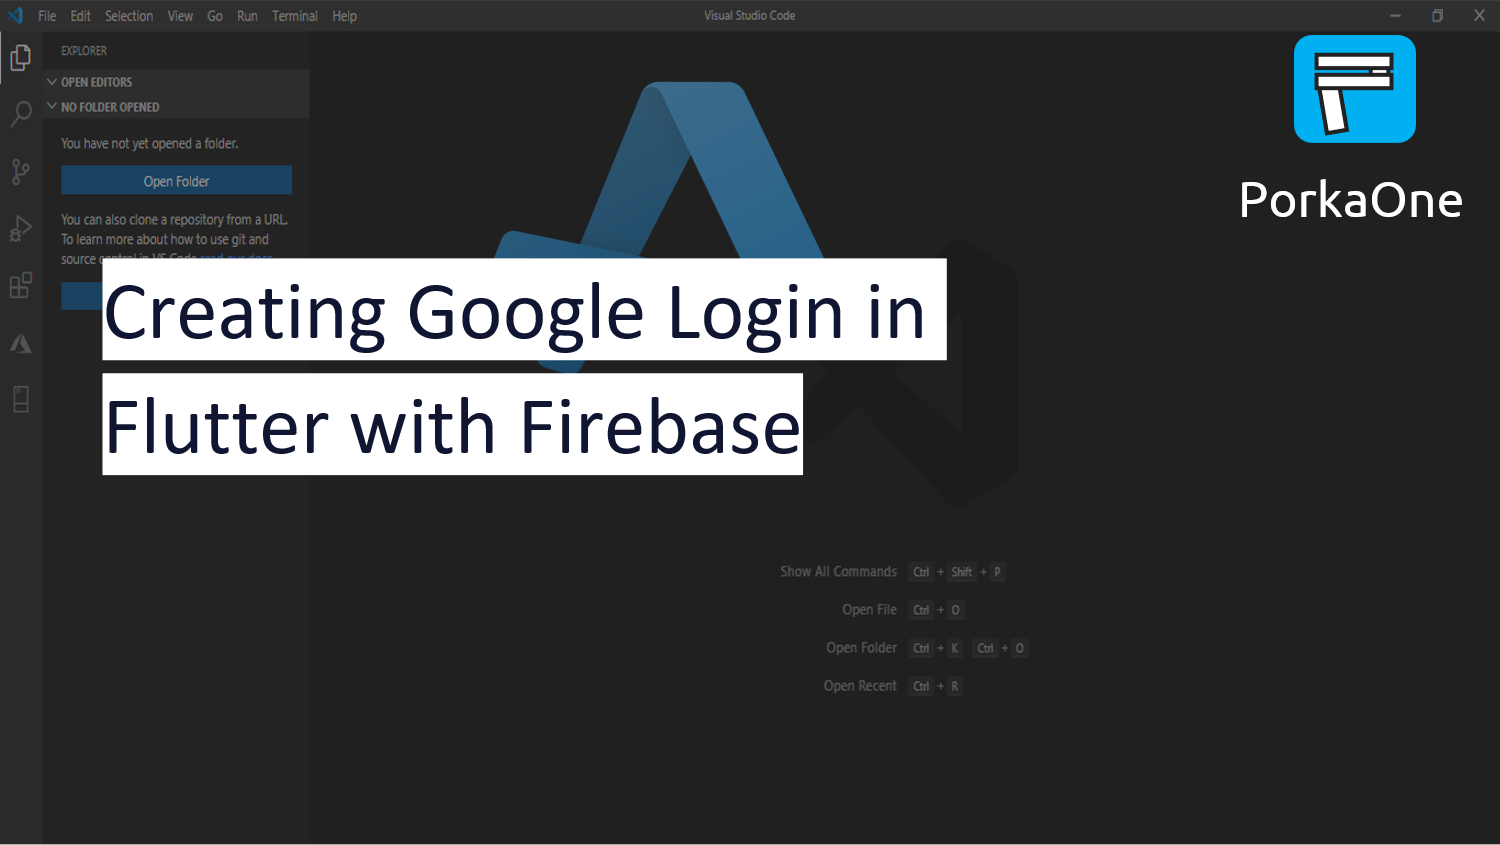 Creating Google Login in Flutter with Firebase